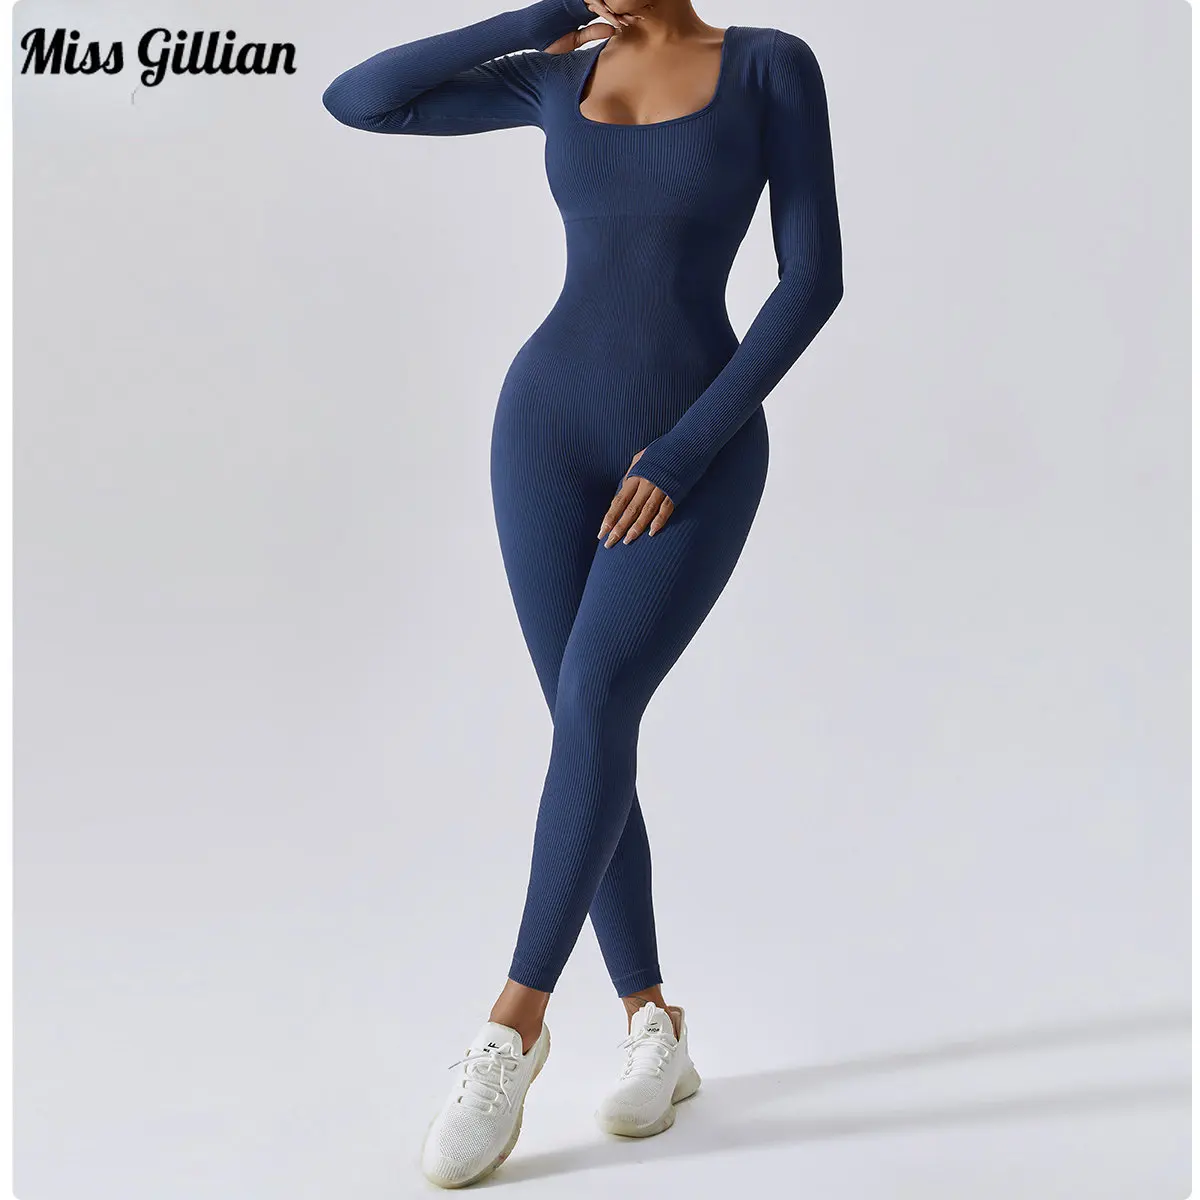 

Autumn Overalls for Women Fitness Jumpsuits Sexy Bodycon Playsuit Square Neck Female Slim Sportwear One Piece Long Sleeve Romper